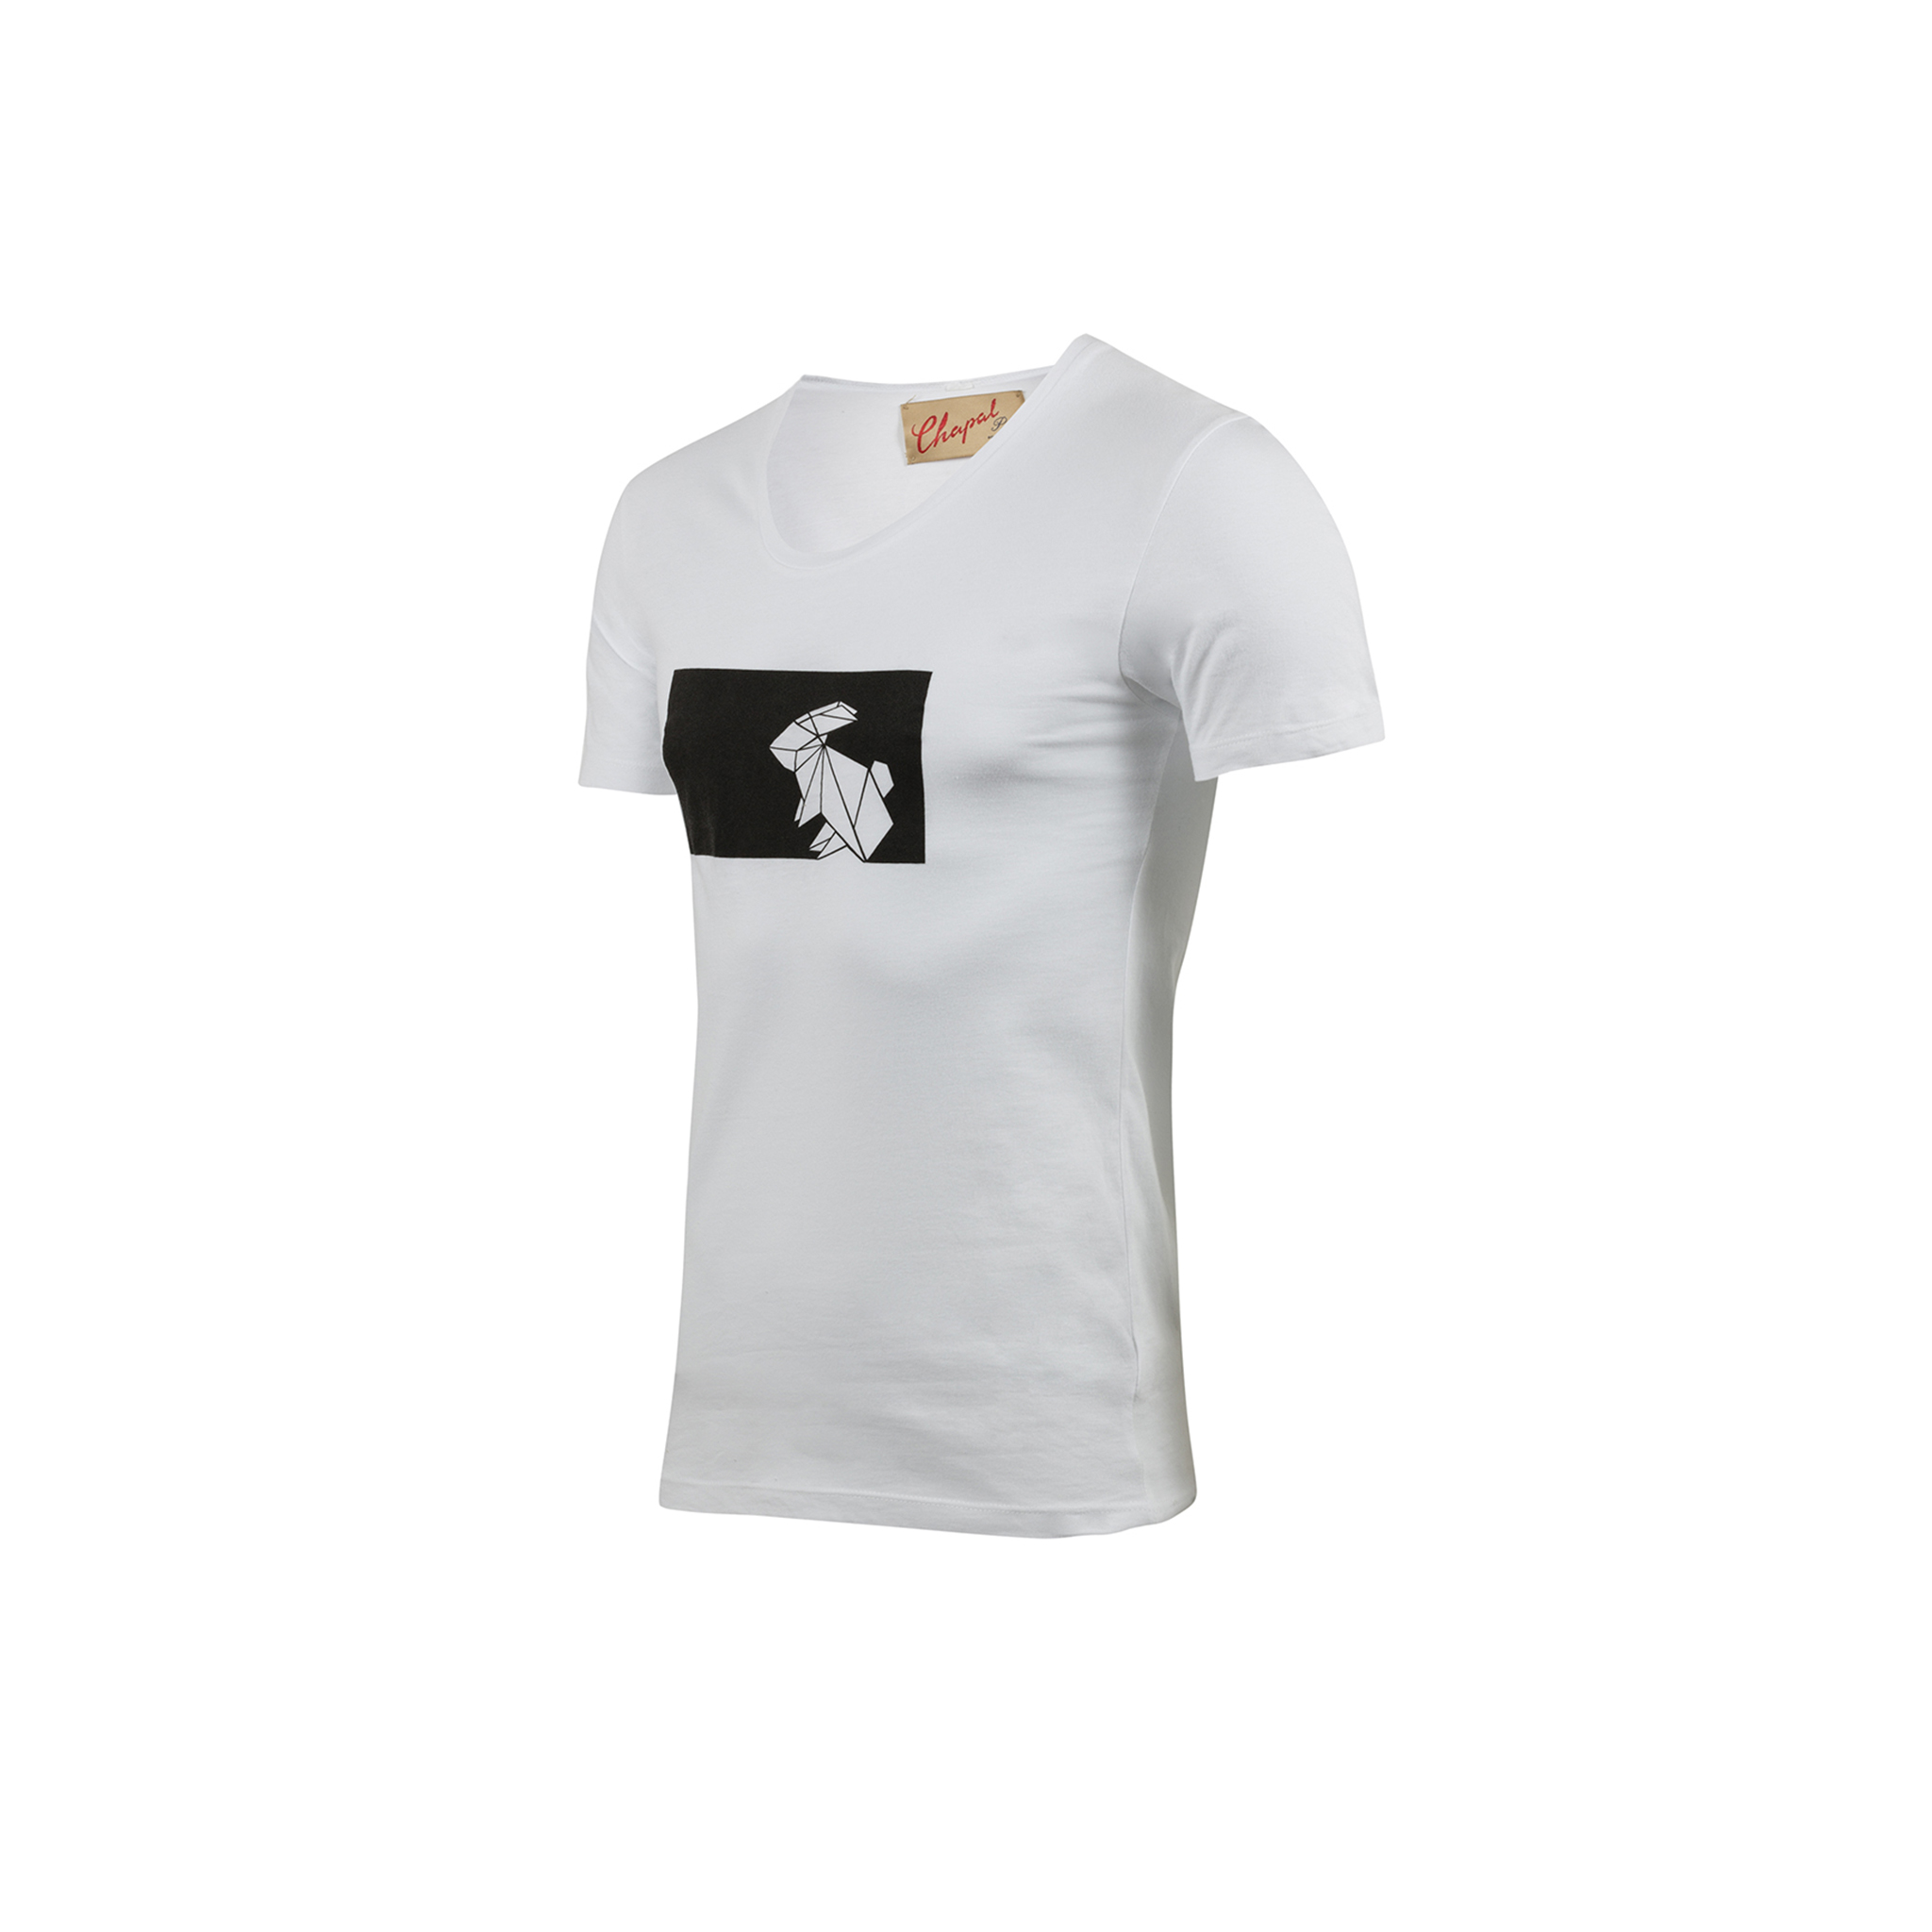 T-shirt Origami - Cotton jersey - White color